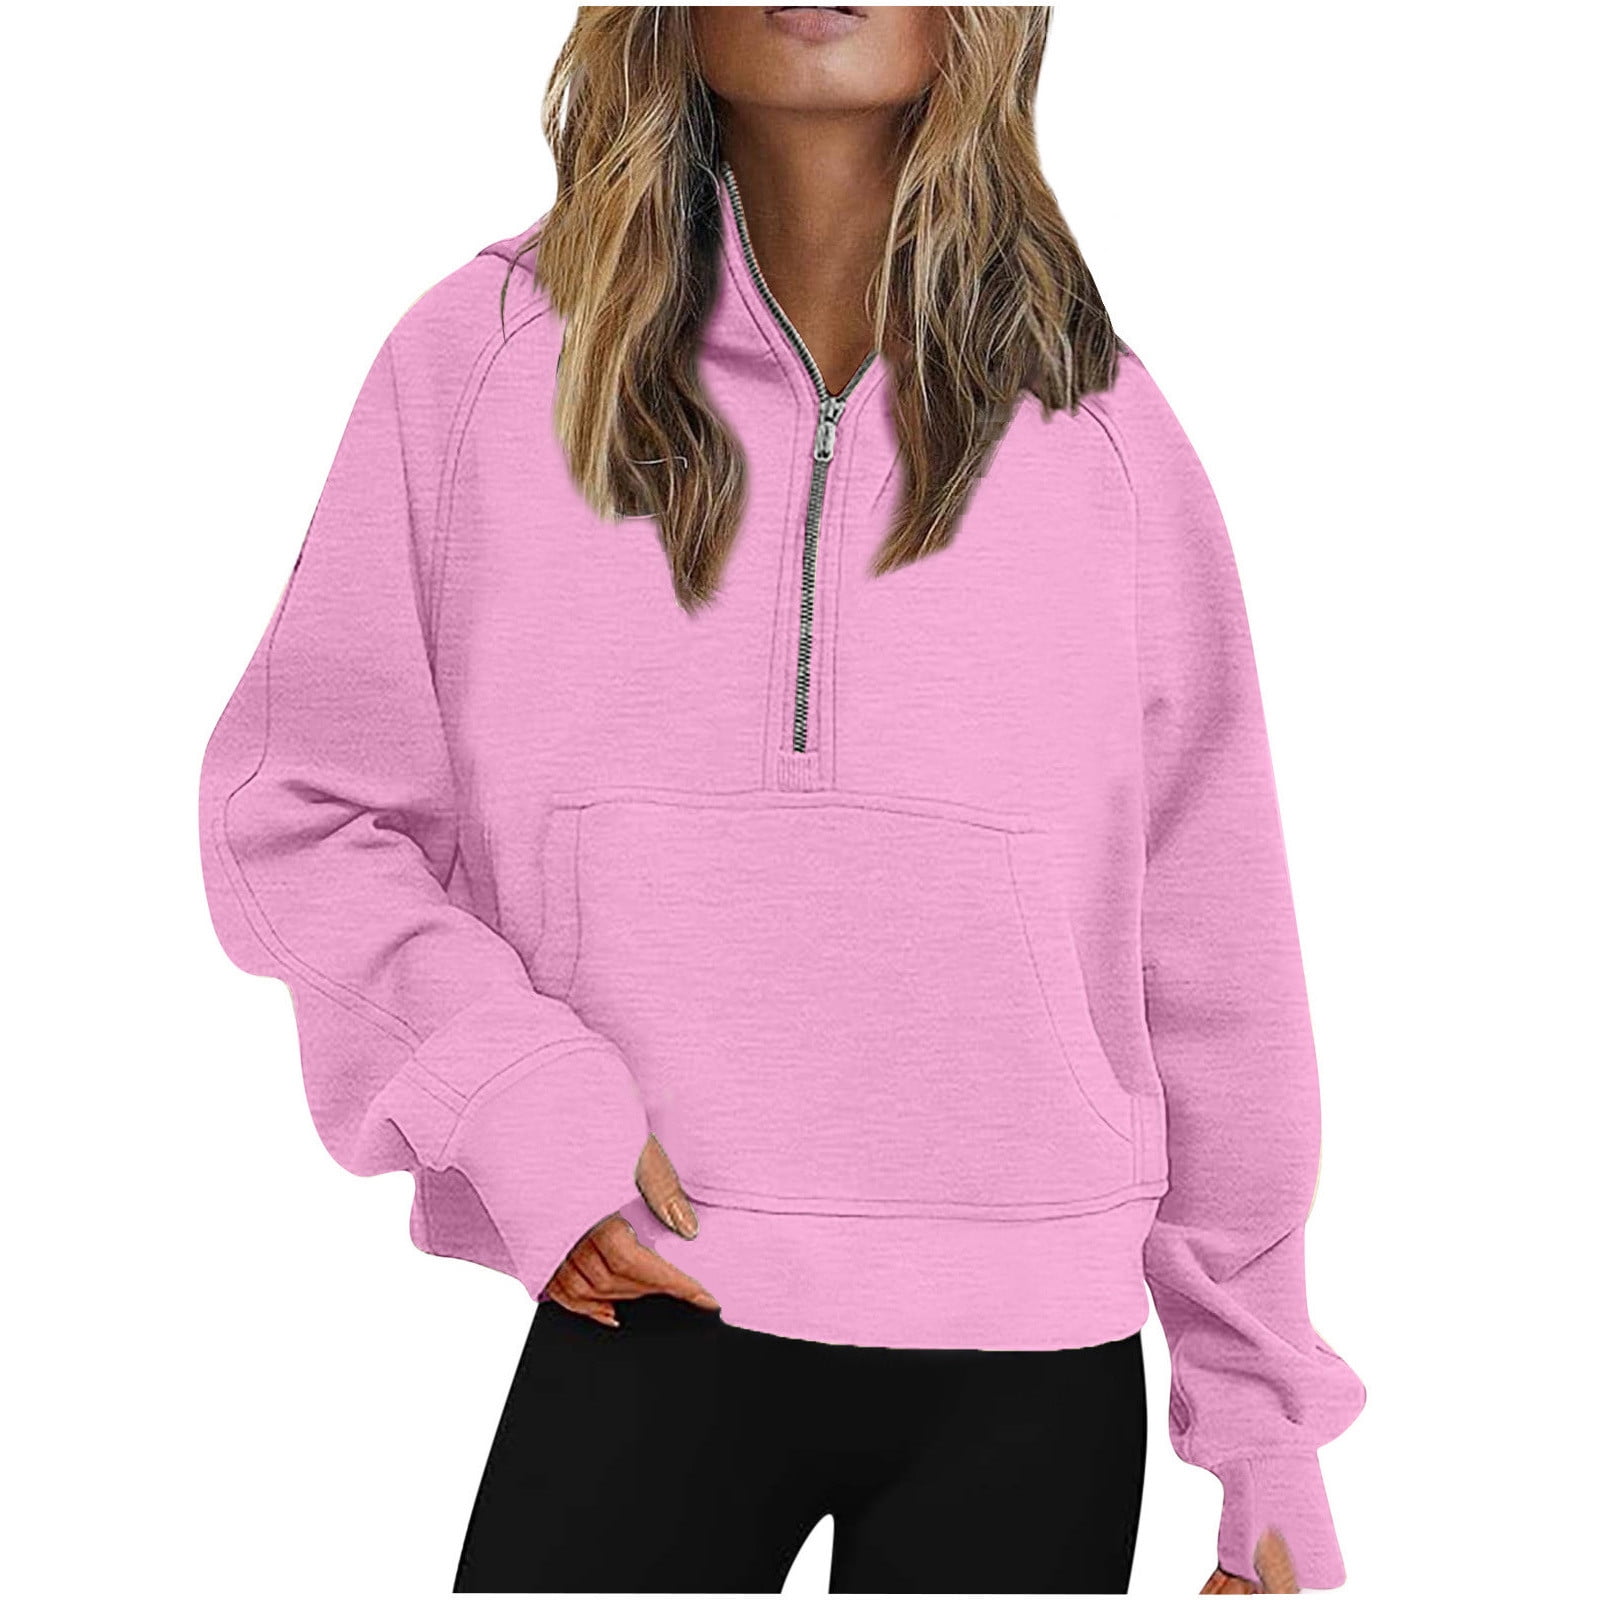 JWZUY Womens Thumb Hole Long Sleeve Fleece Quarter Zip Pullover Sweatshirts  Half Zip Cropped Hoodies Fall Outfits Clothes Pink L 